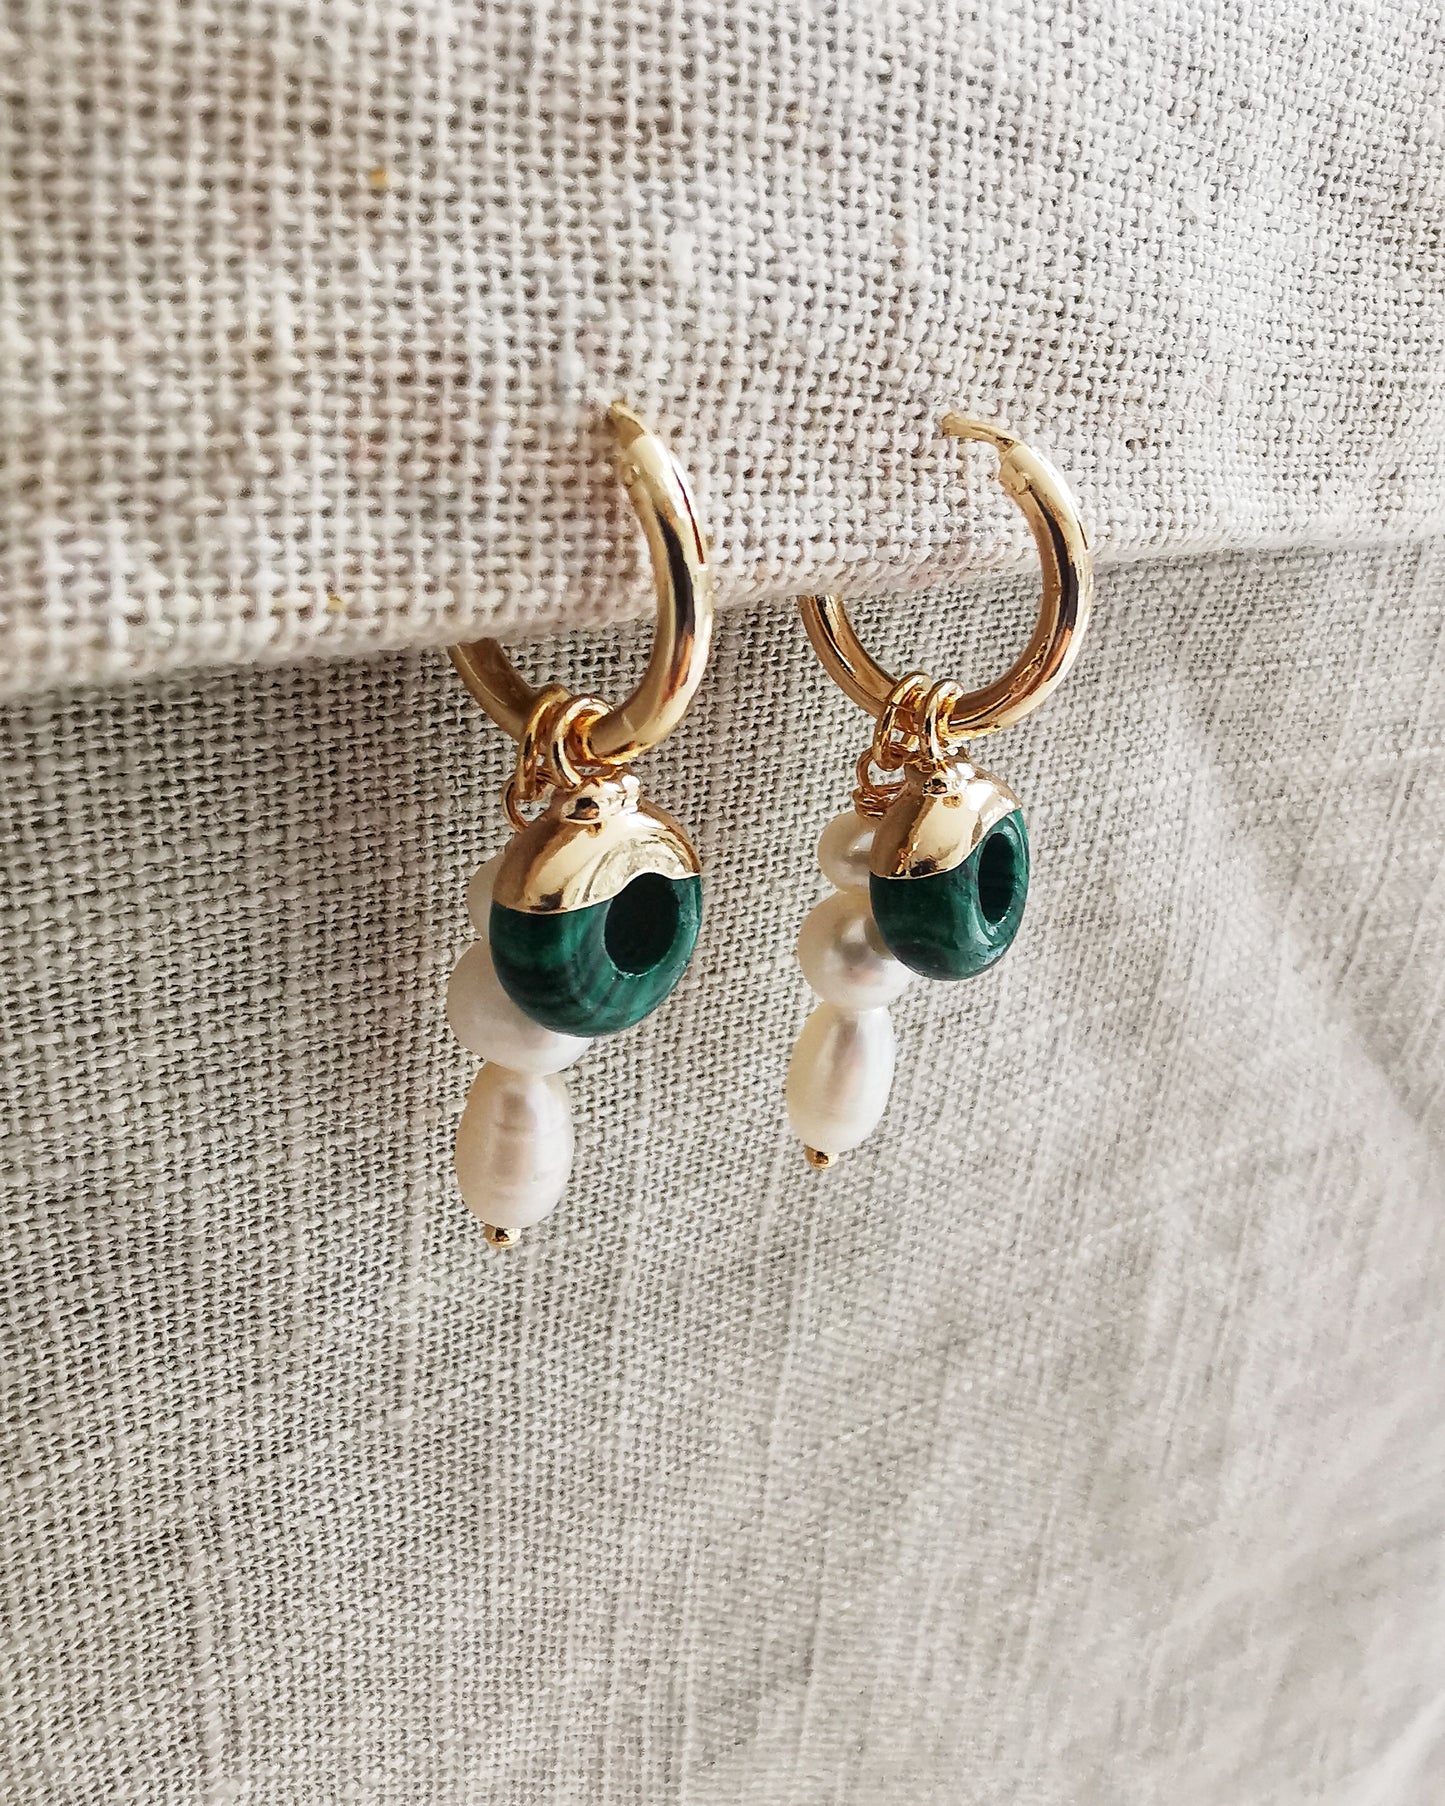 Detachable Hoop Earrings with Freshwater Pearl and Malachite.